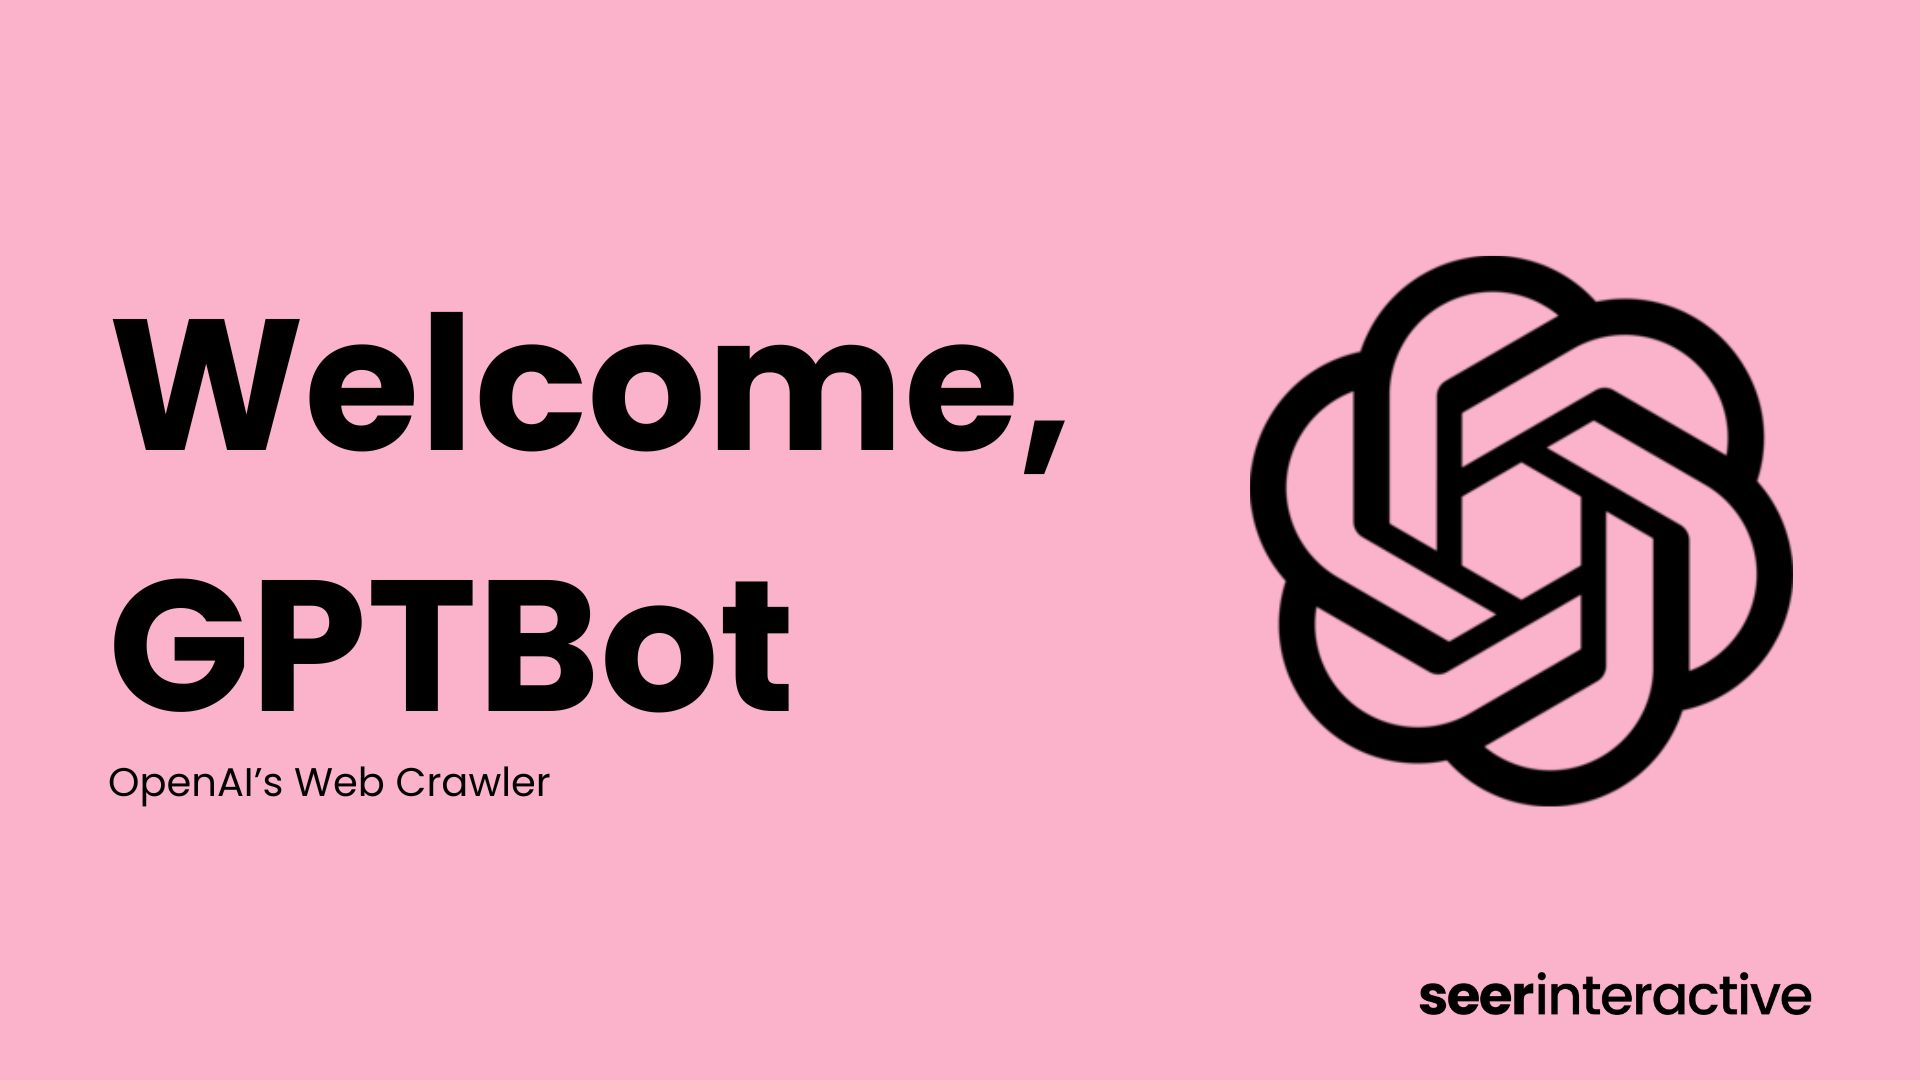 Here’s Why You Should Allow GPTBot to Crawl Your Site